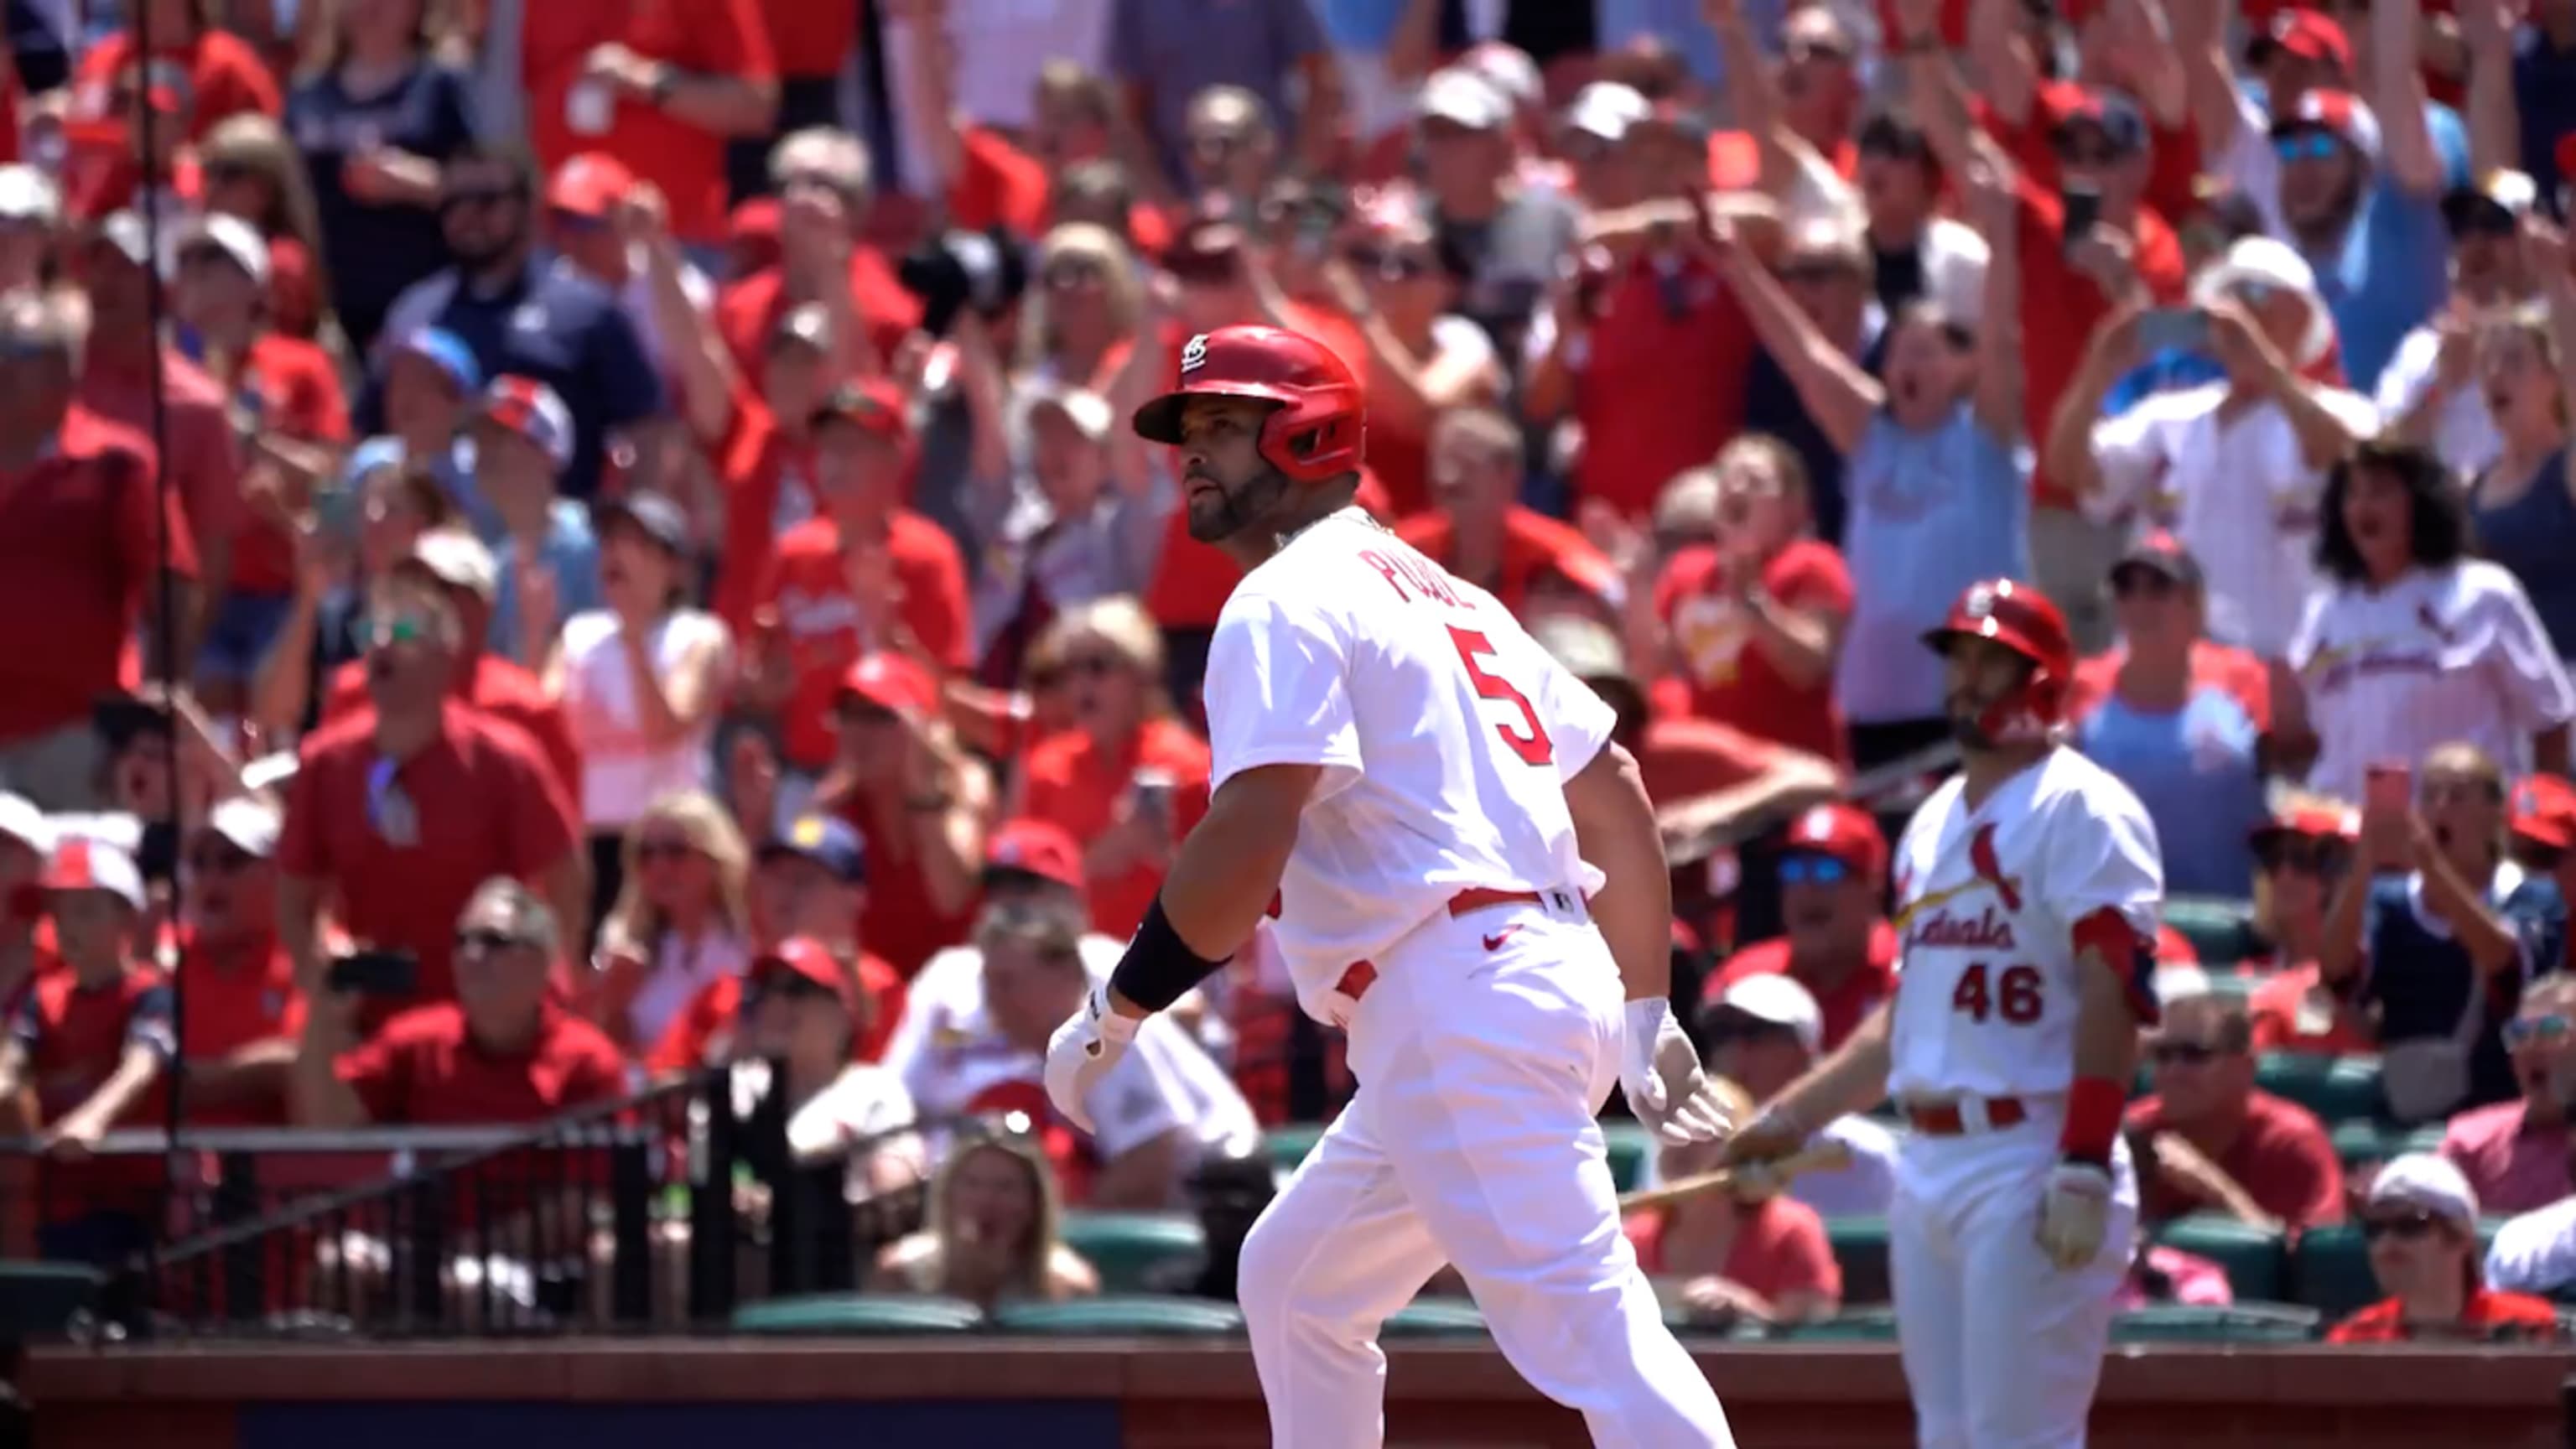 Willie Mays salutes Albert Pujols for 660th home run: 'Good for him   good for baseball